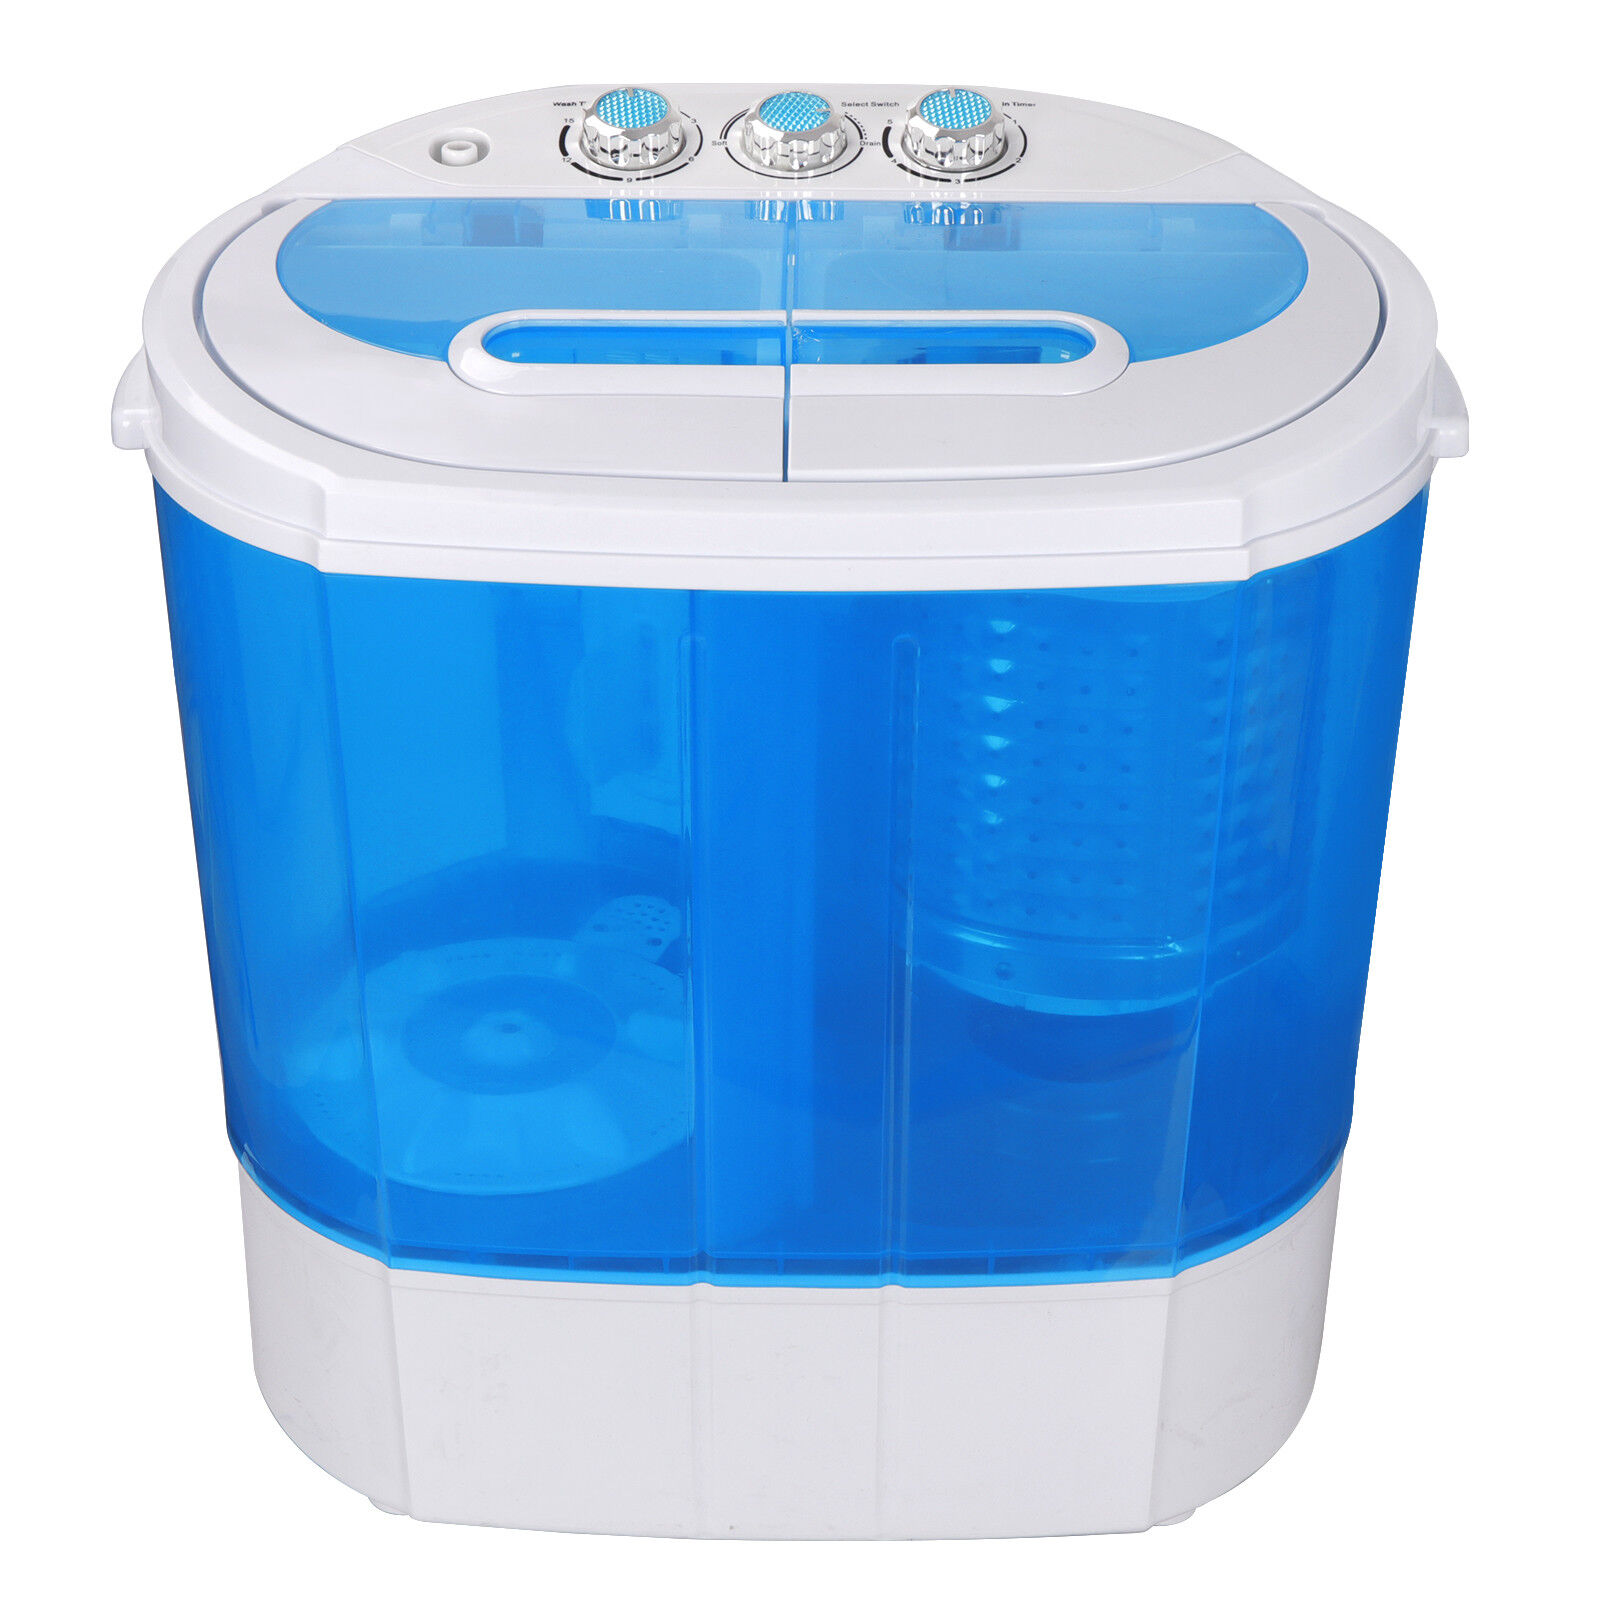 Portable Washing Shipping included Machine Compact Limited time for free shipping lightweight Spi 10lbs w Washer